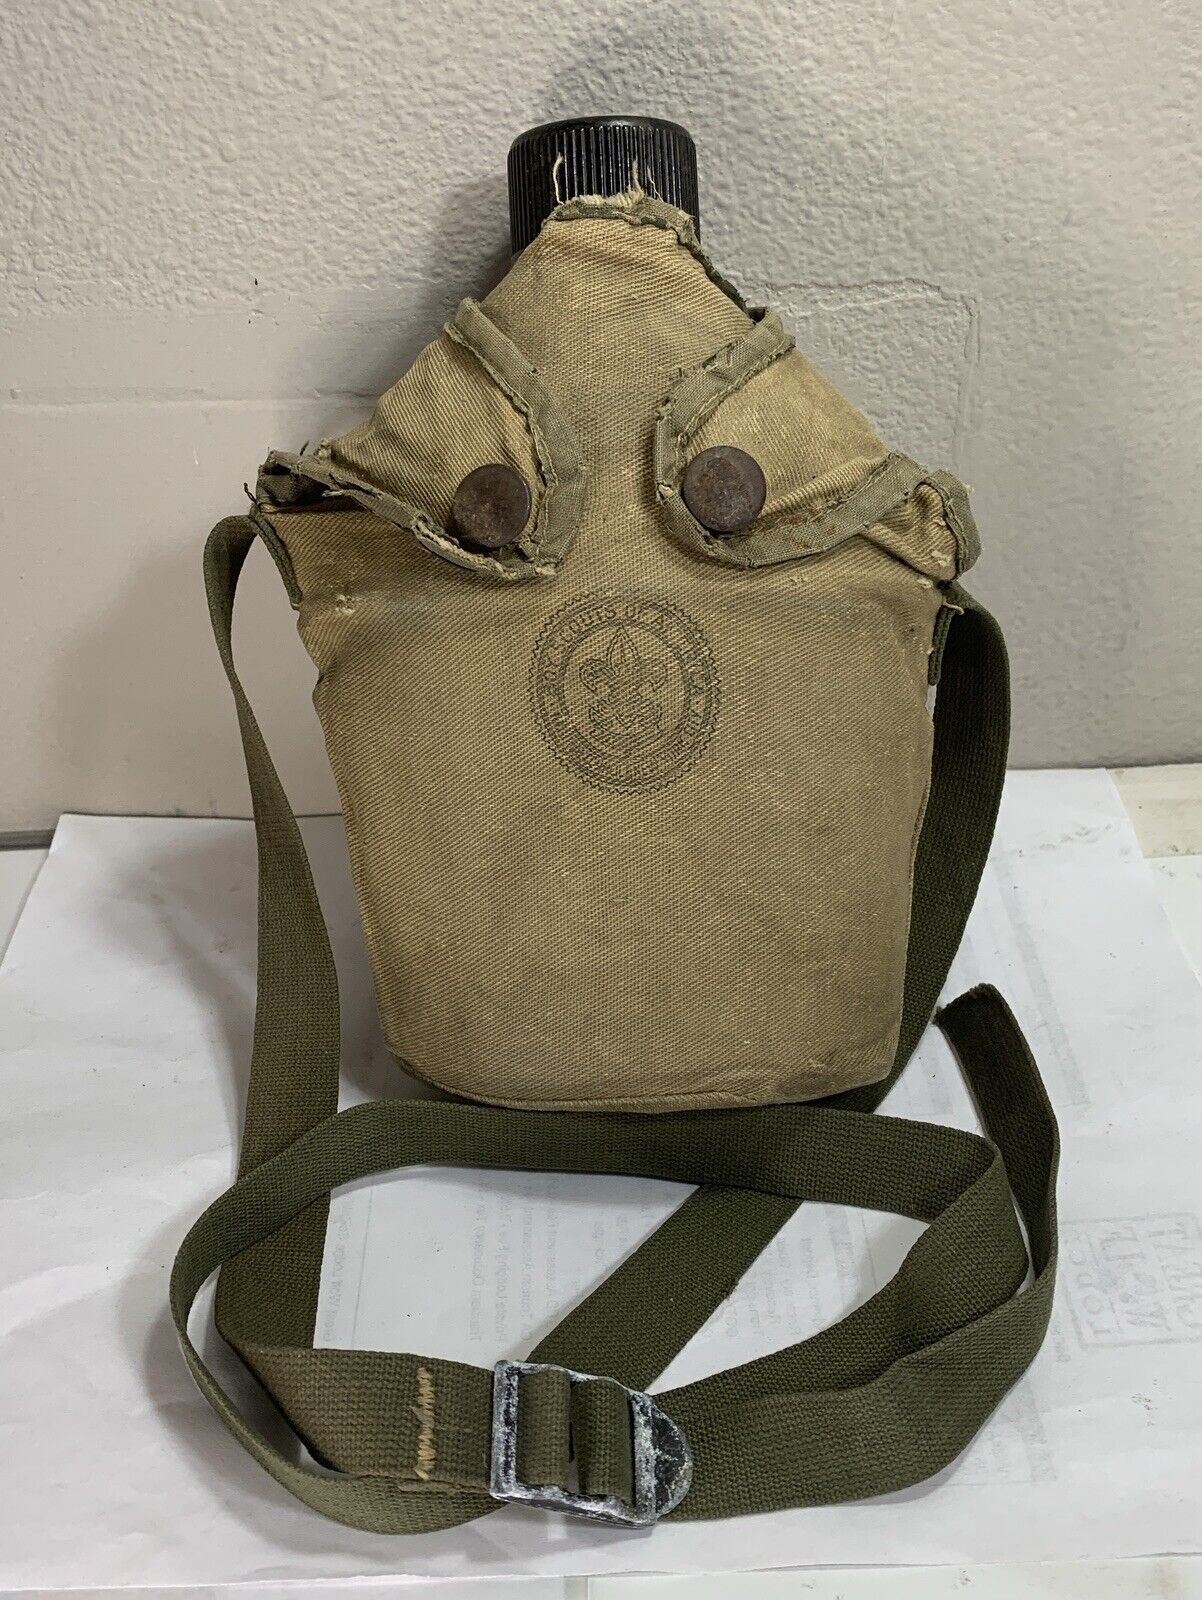 VINTAGE BSA BOY SCOUTS OF AMERICA WWII STYLE CANTEEN RARE US GP & F. CO 1945